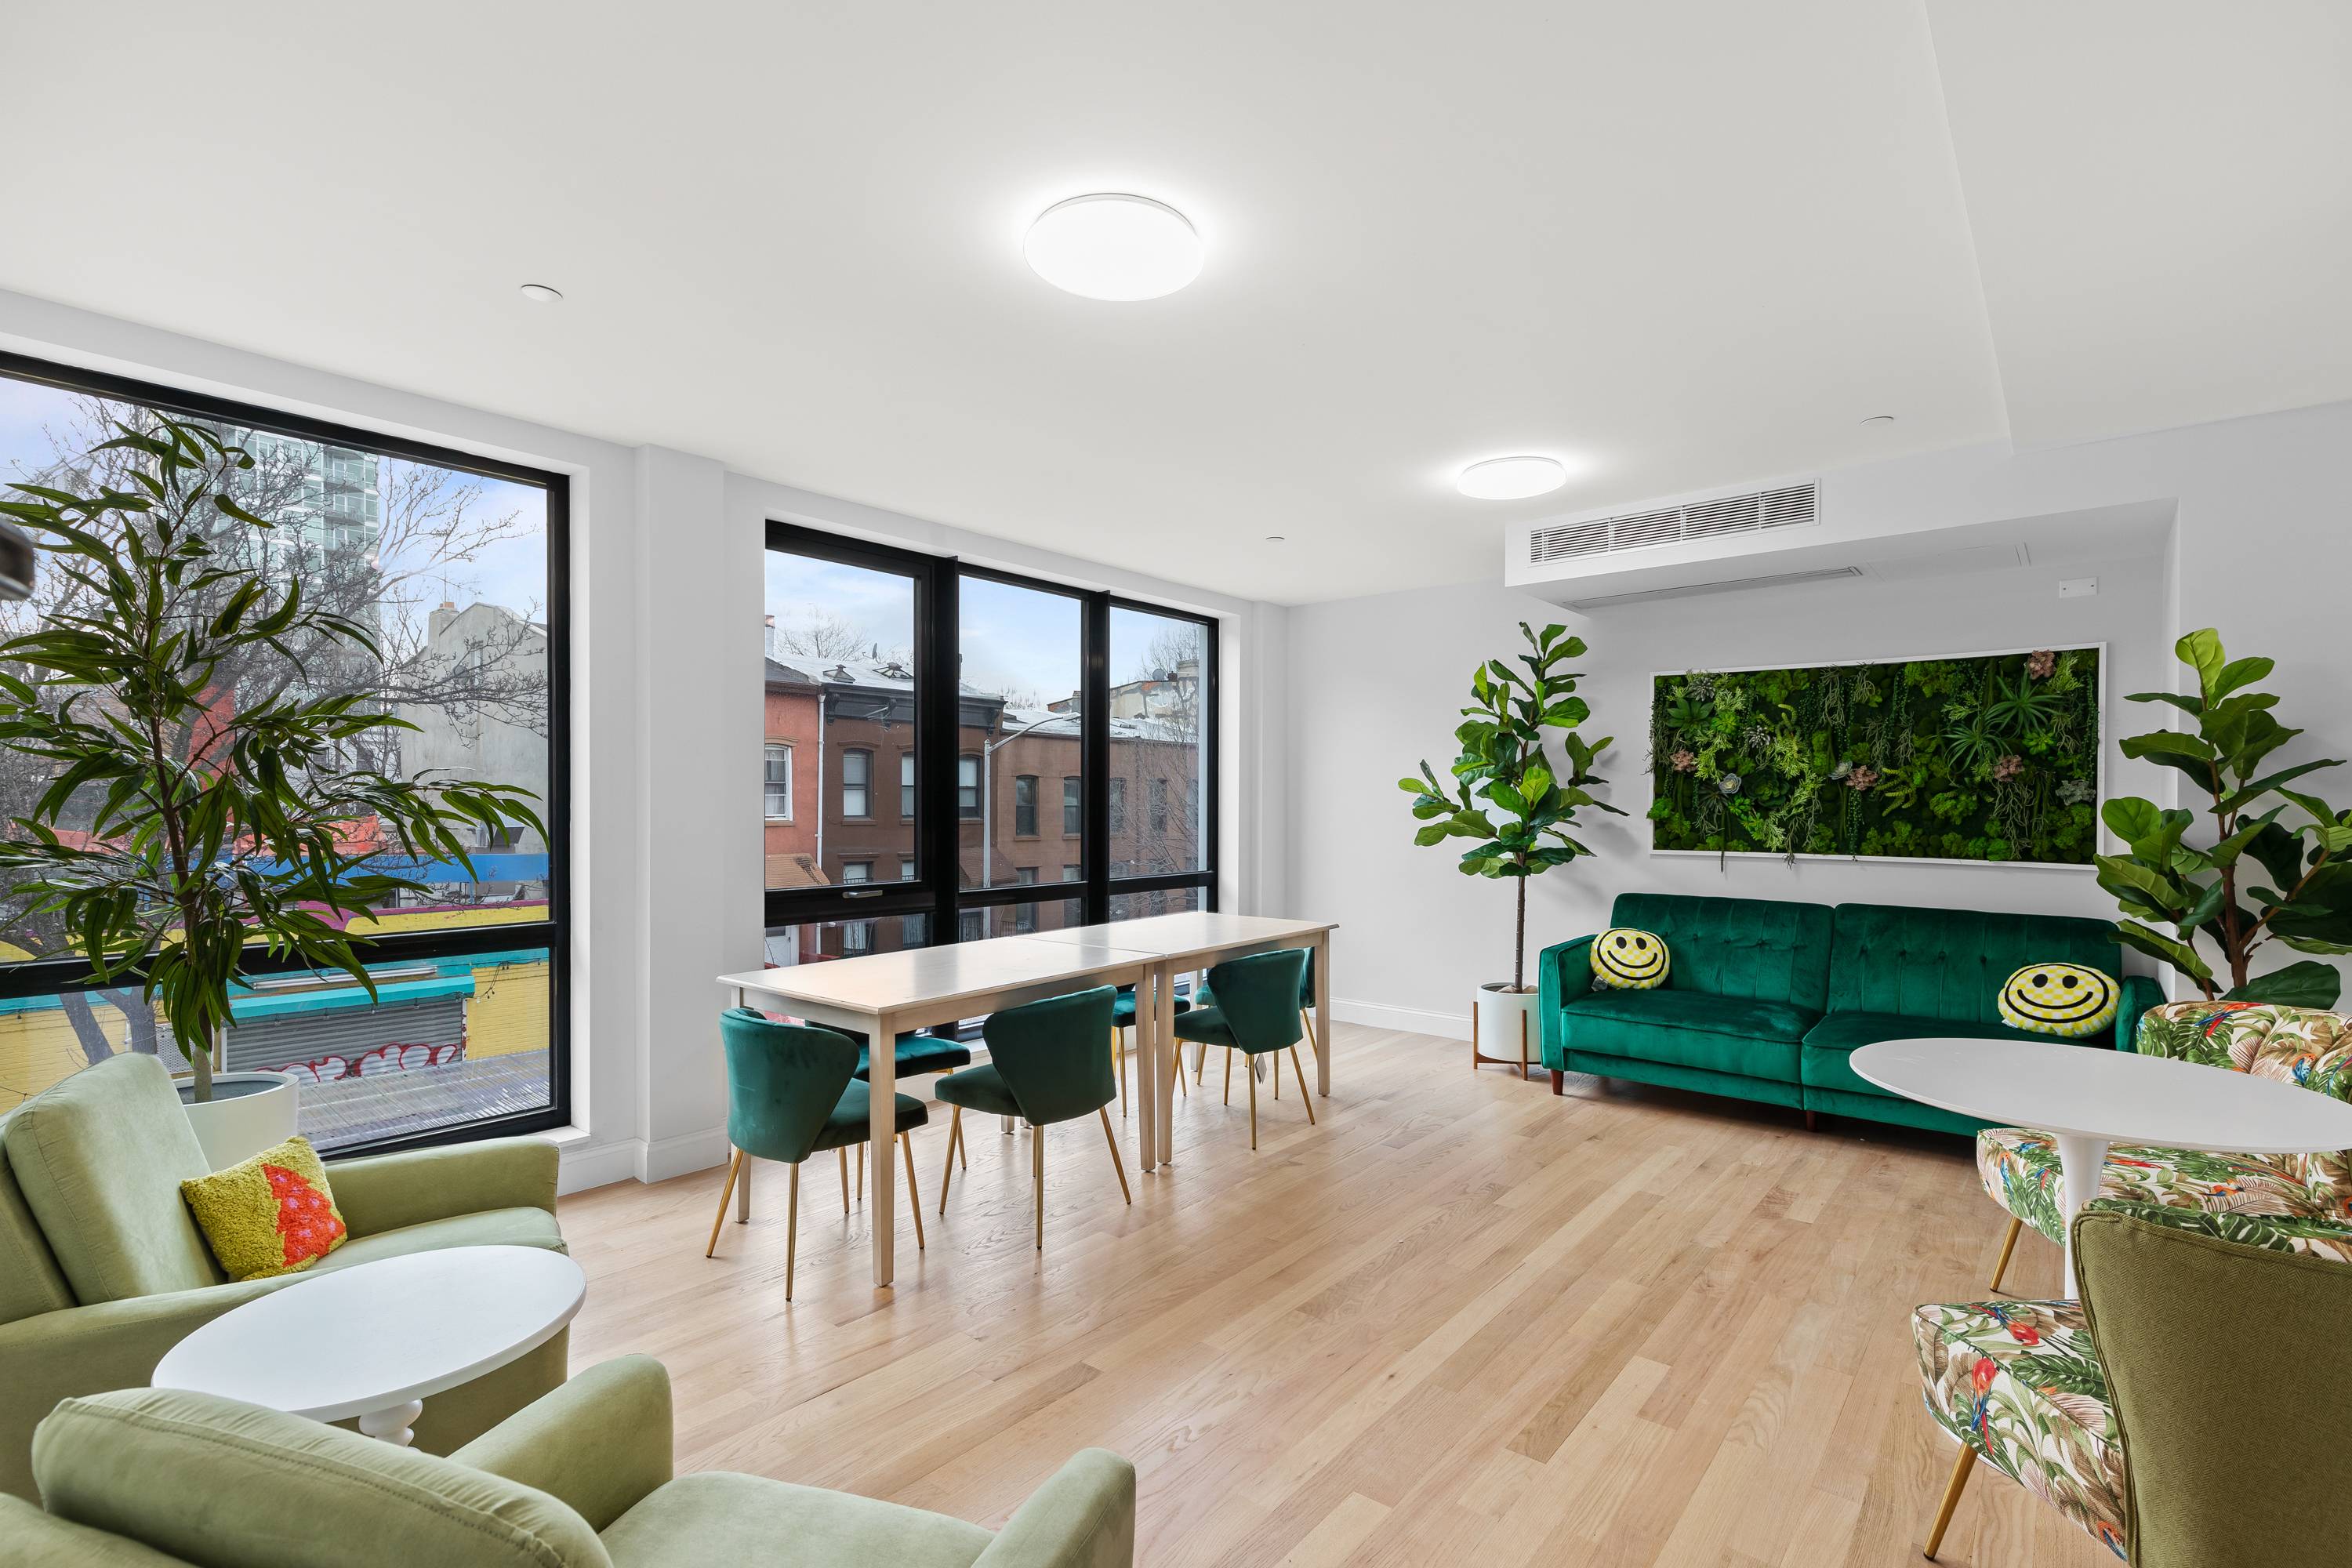 Designed to maximize space, fresh air, and natural light each home offers residents a contemporary indoor outdoor lifestyle in the heart of charming Clinton Hill.